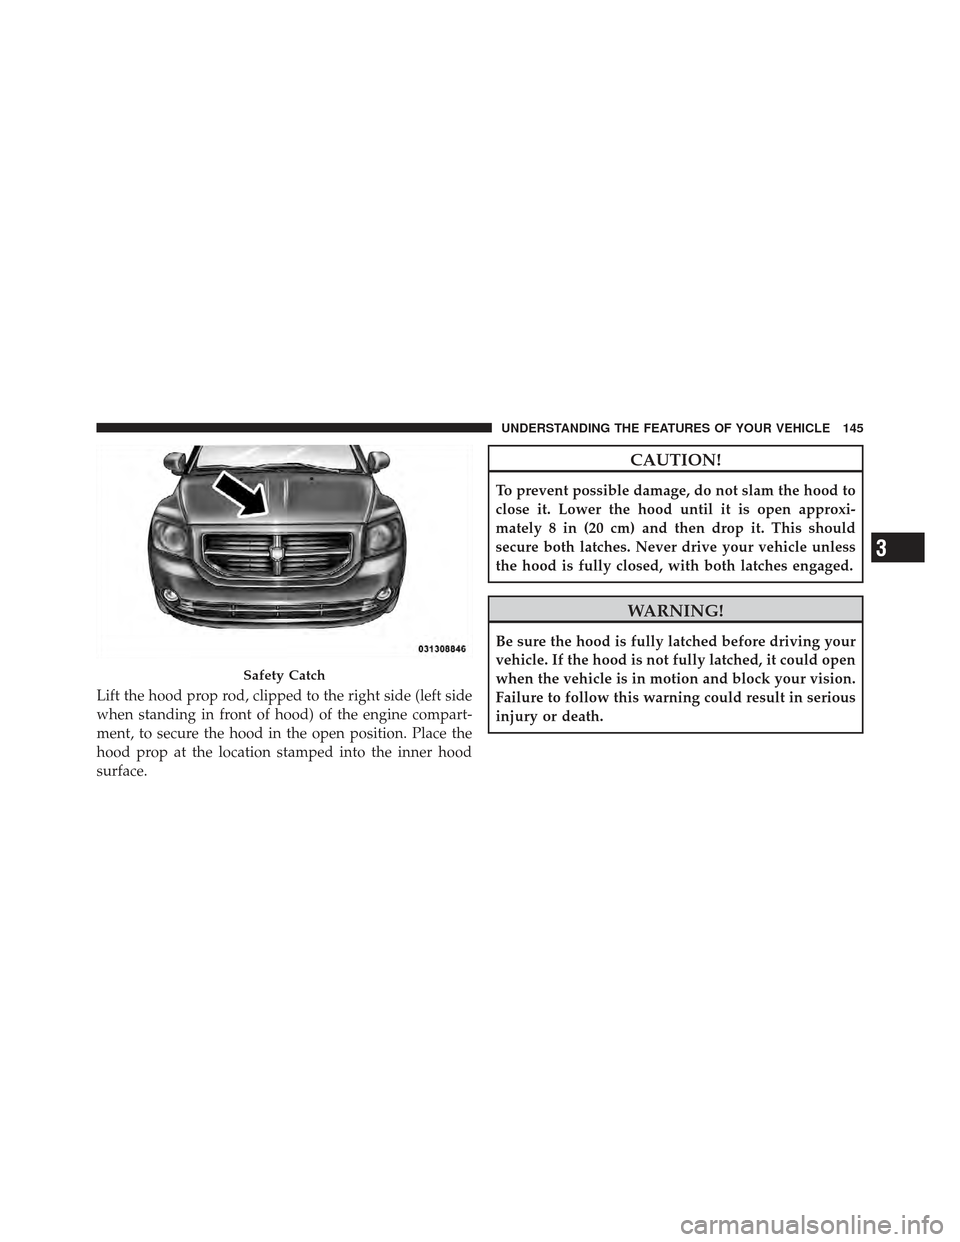 DODGE CALIBER 2011 1.G User Guide Lift the hood prop rod, clipped to the right side (left side
when standing in front of hood) of the engine compart-
ment, to secure the hood in the open position. Place the
hood prop at the location s